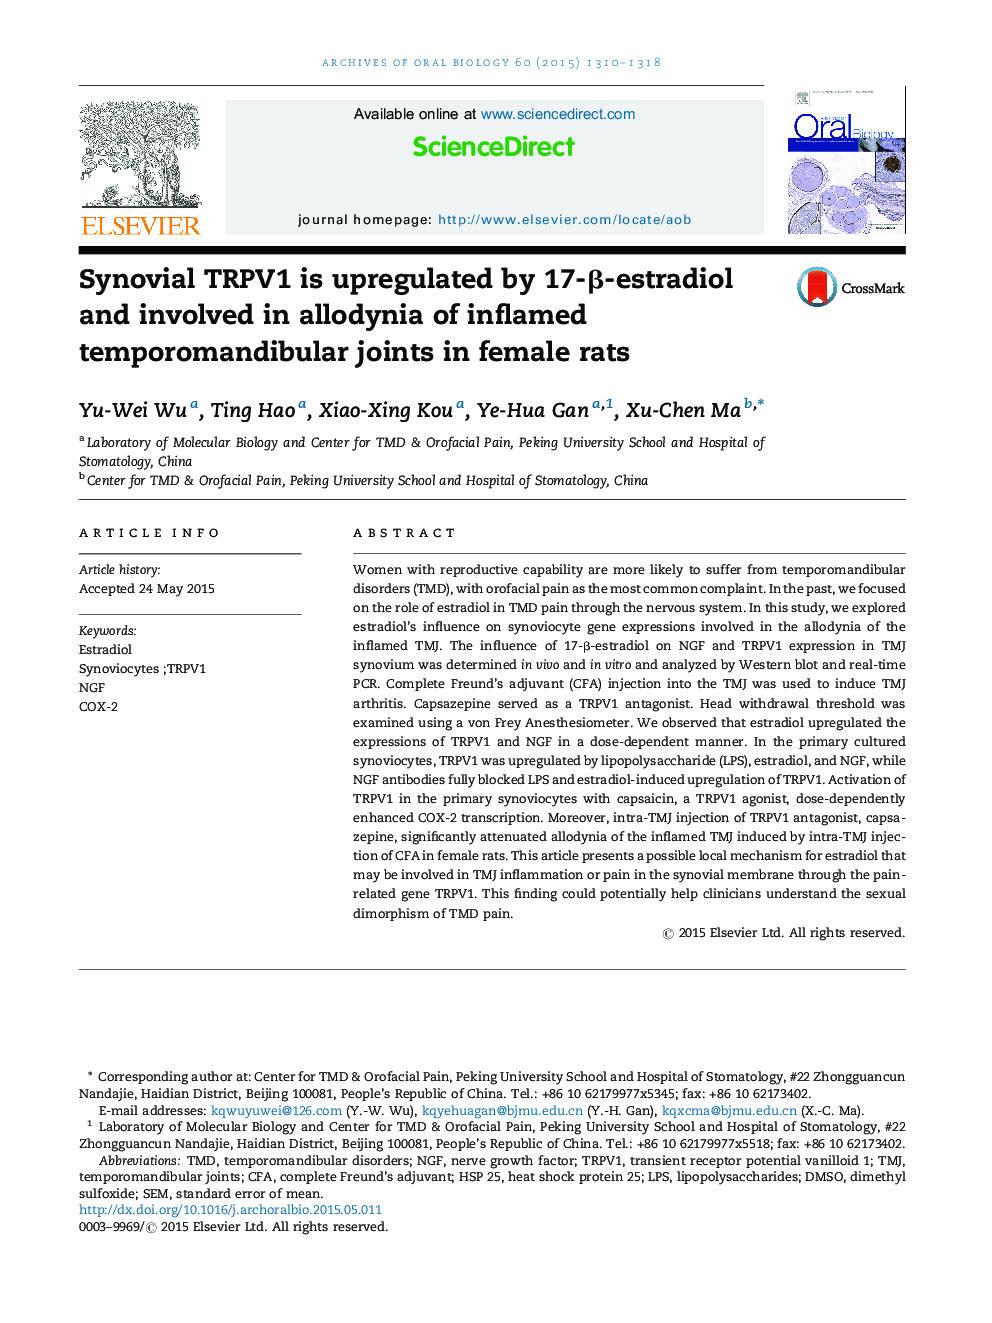 Synovial TRPV1 is upregulated by 17-Î²-estradiol and involved in allodynia of inflamed temporomandibular joints in female rats